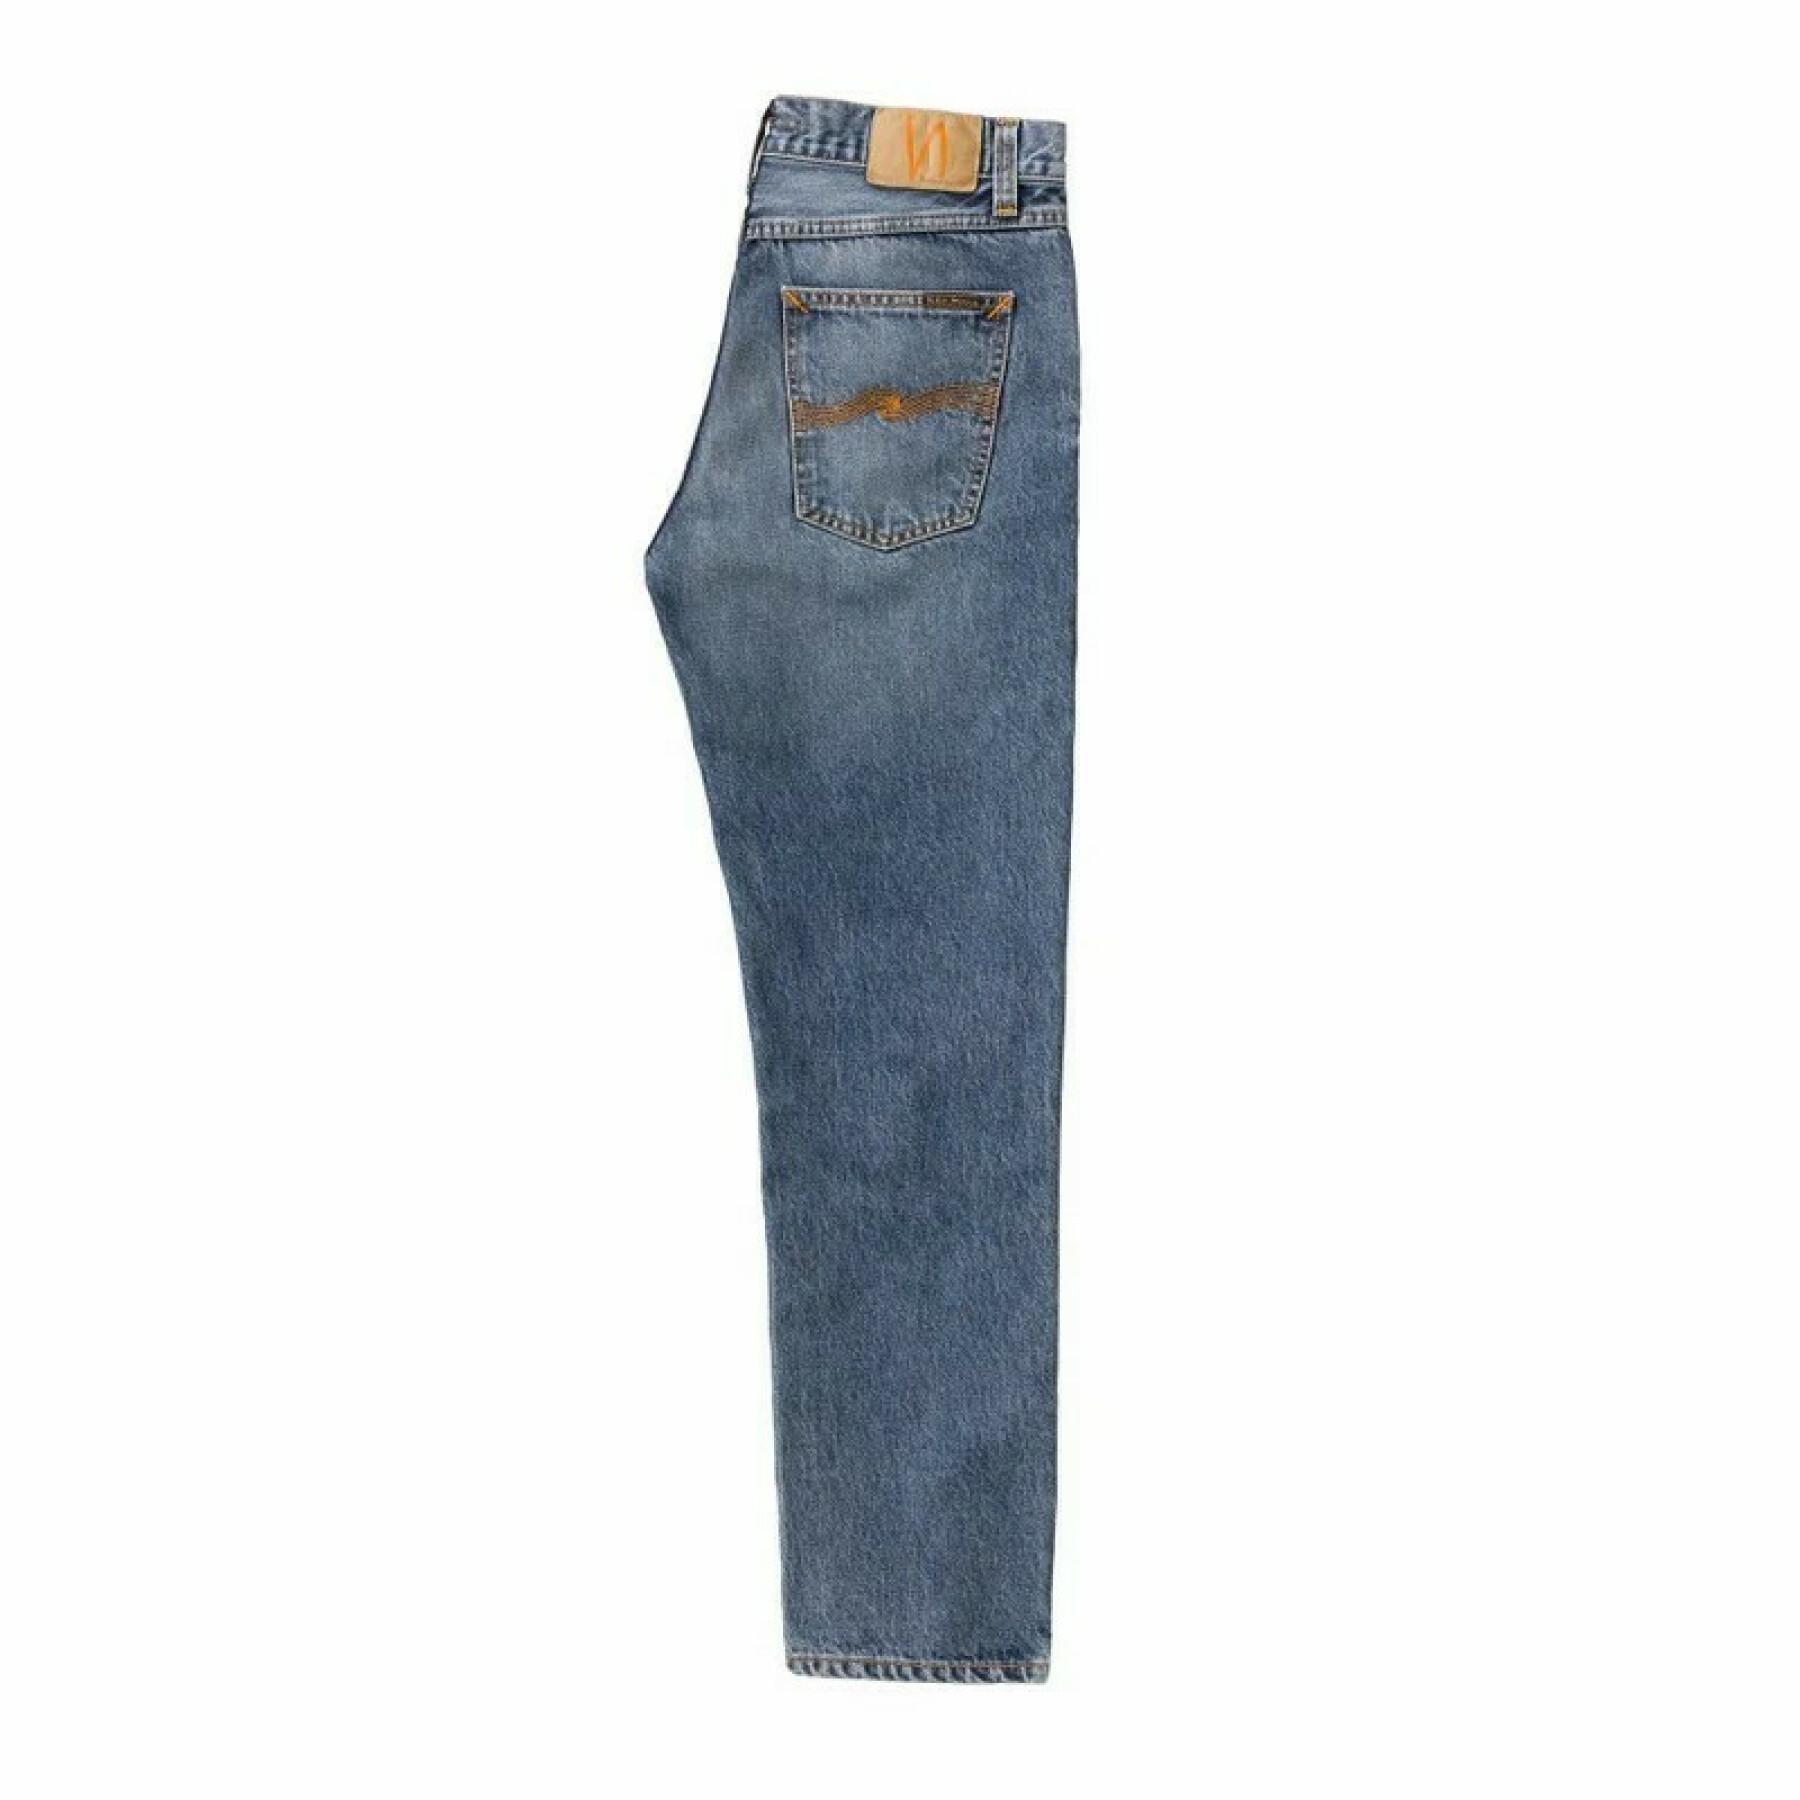 Pantalones vaqueros Nudie Jeans Gritty Jackson Far out